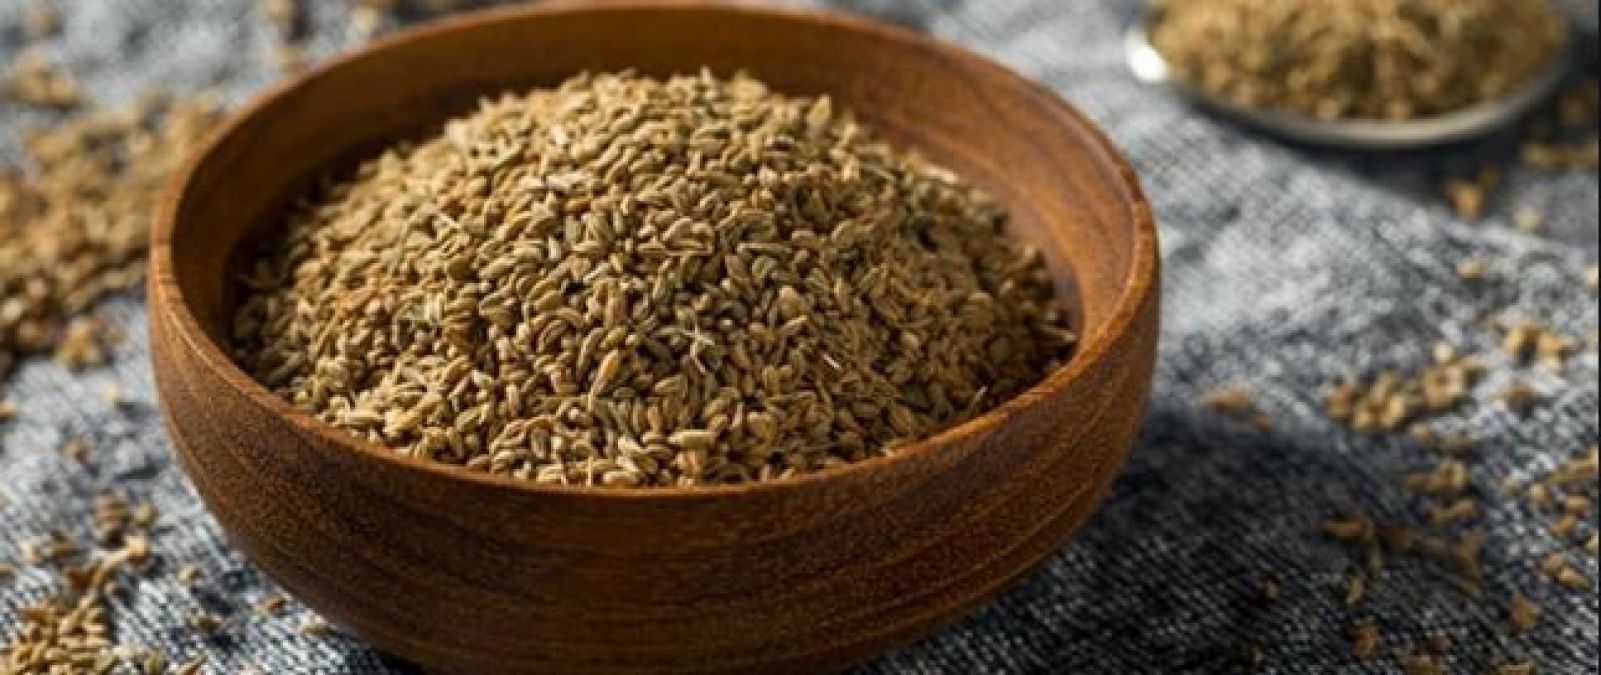 Ajwain's facepack is beneficial for everything from removing pimples to refining the skin